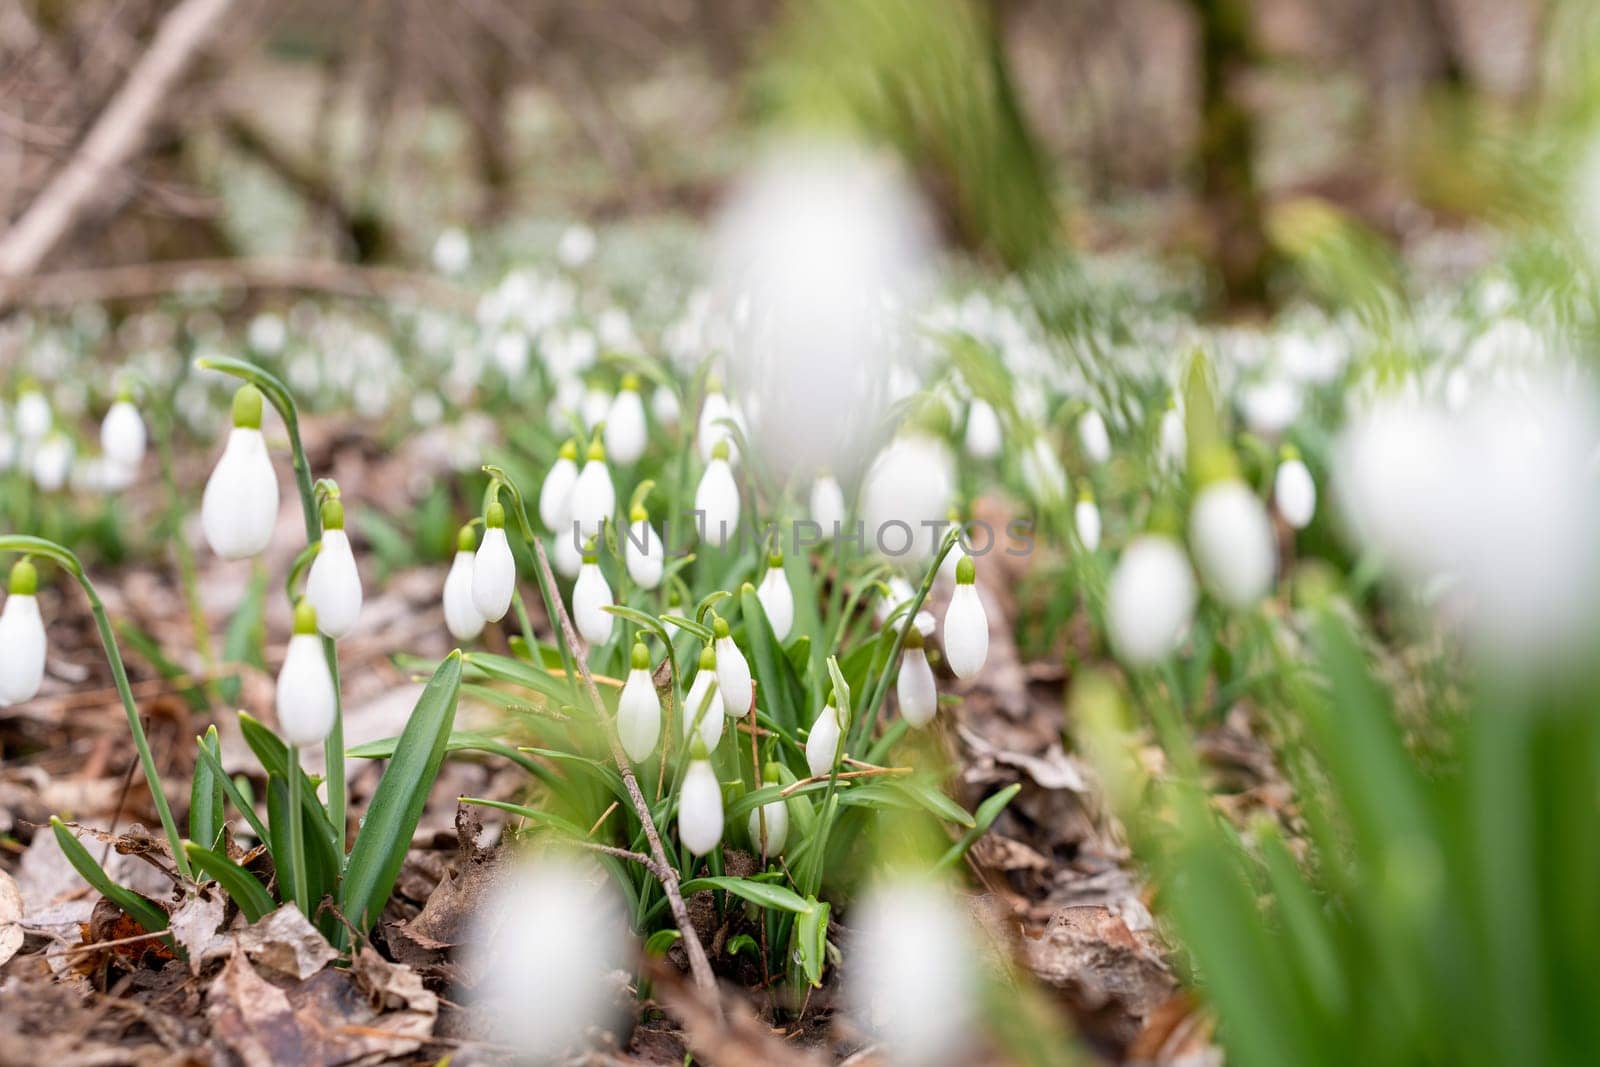 Spring snowdrop snowflake flowers blooms. Snowdrops, Galanthus nivalis, in flower in February. Snowdrops in the forest